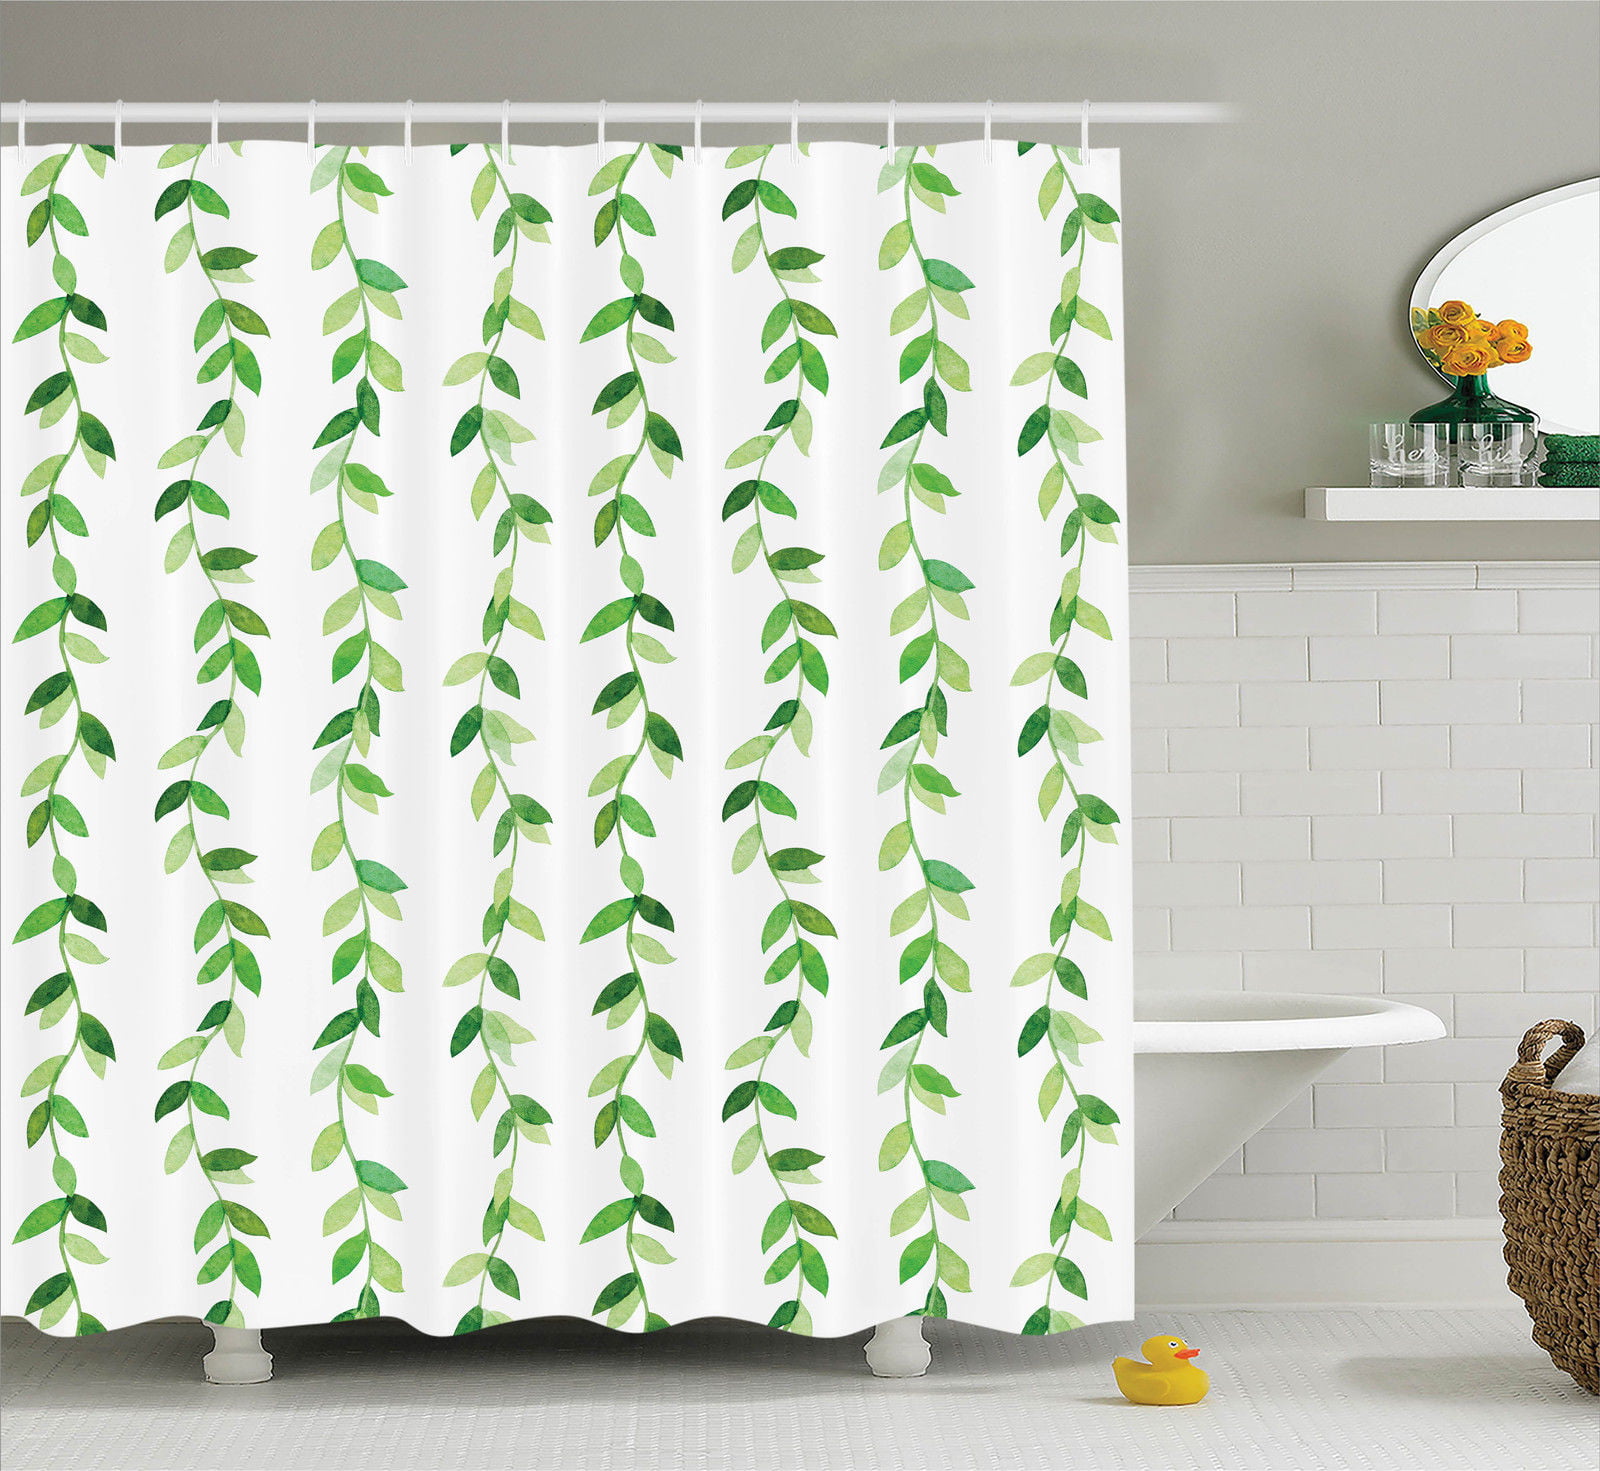 Leaves Decor Shower Curtain Set, Vivid Fresh Watercolor Ivy Branches ...